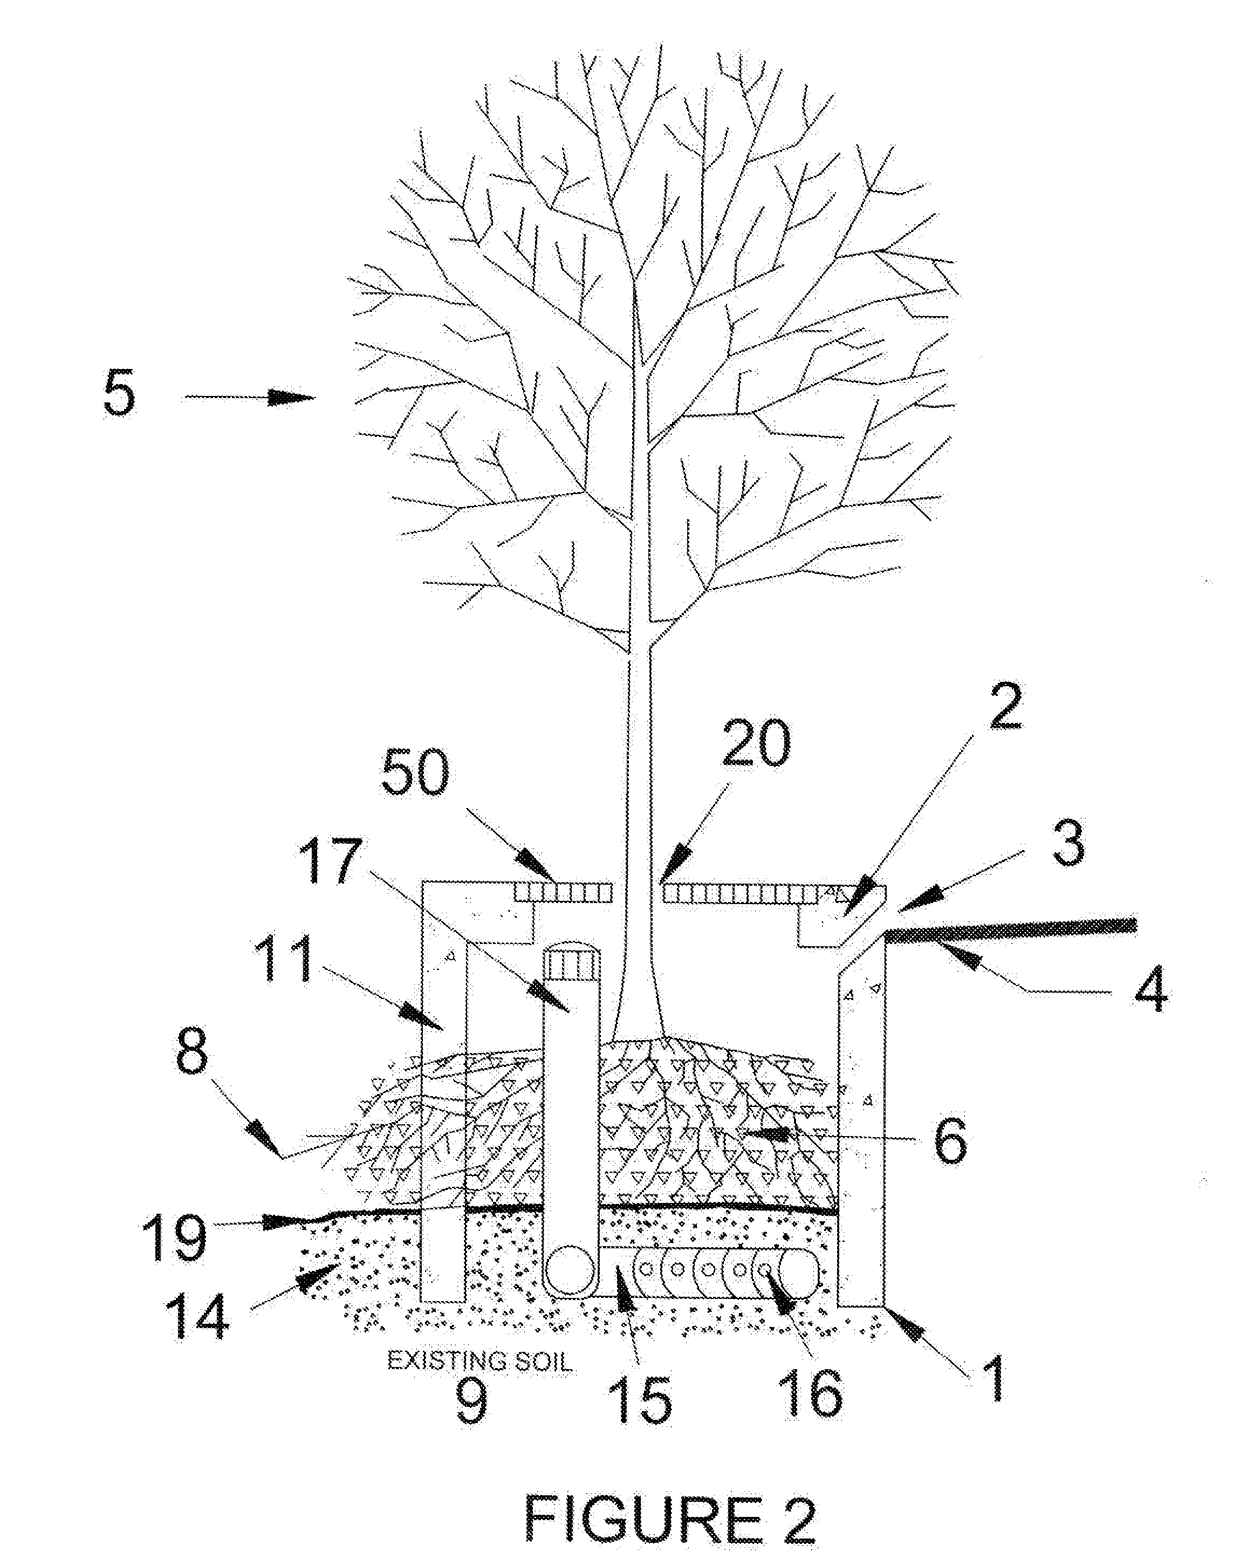 Tree Frame and Grate System and Method to Improve Growth of Vegetation in an Urban Environment